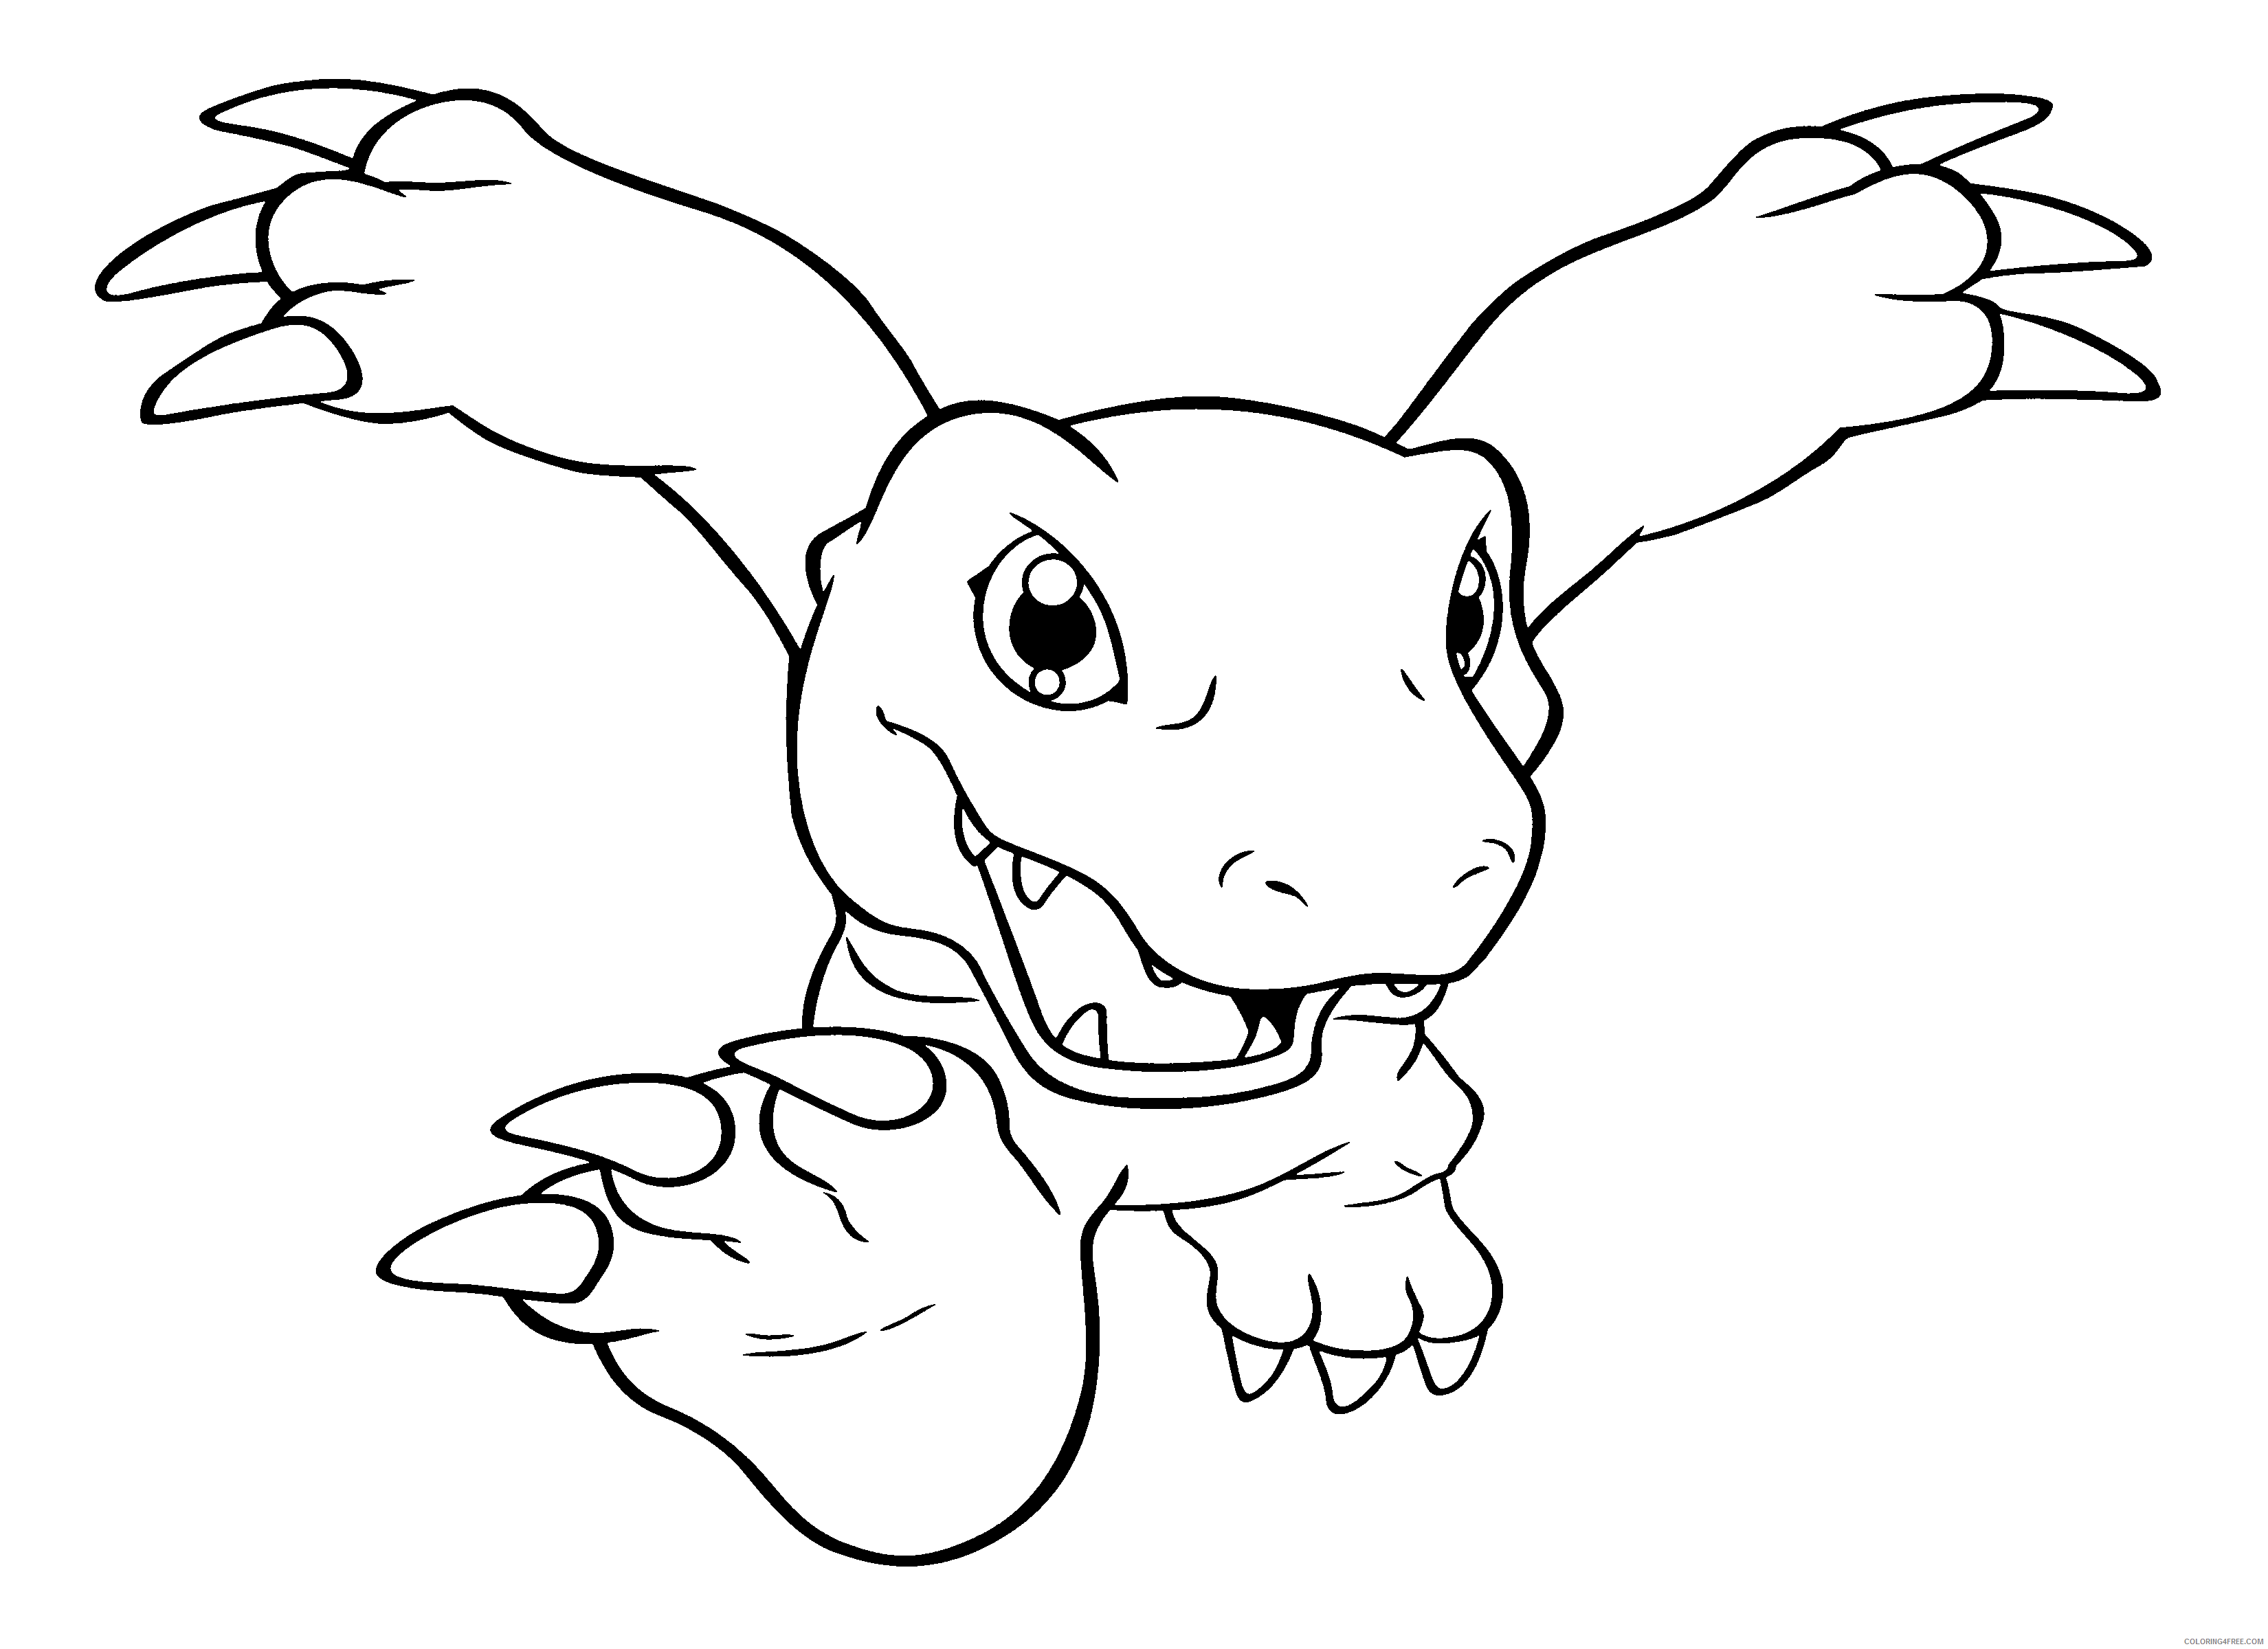 Digimon Printable Coloring Pages Anime digimon 154 2021 0245 Coloring4free